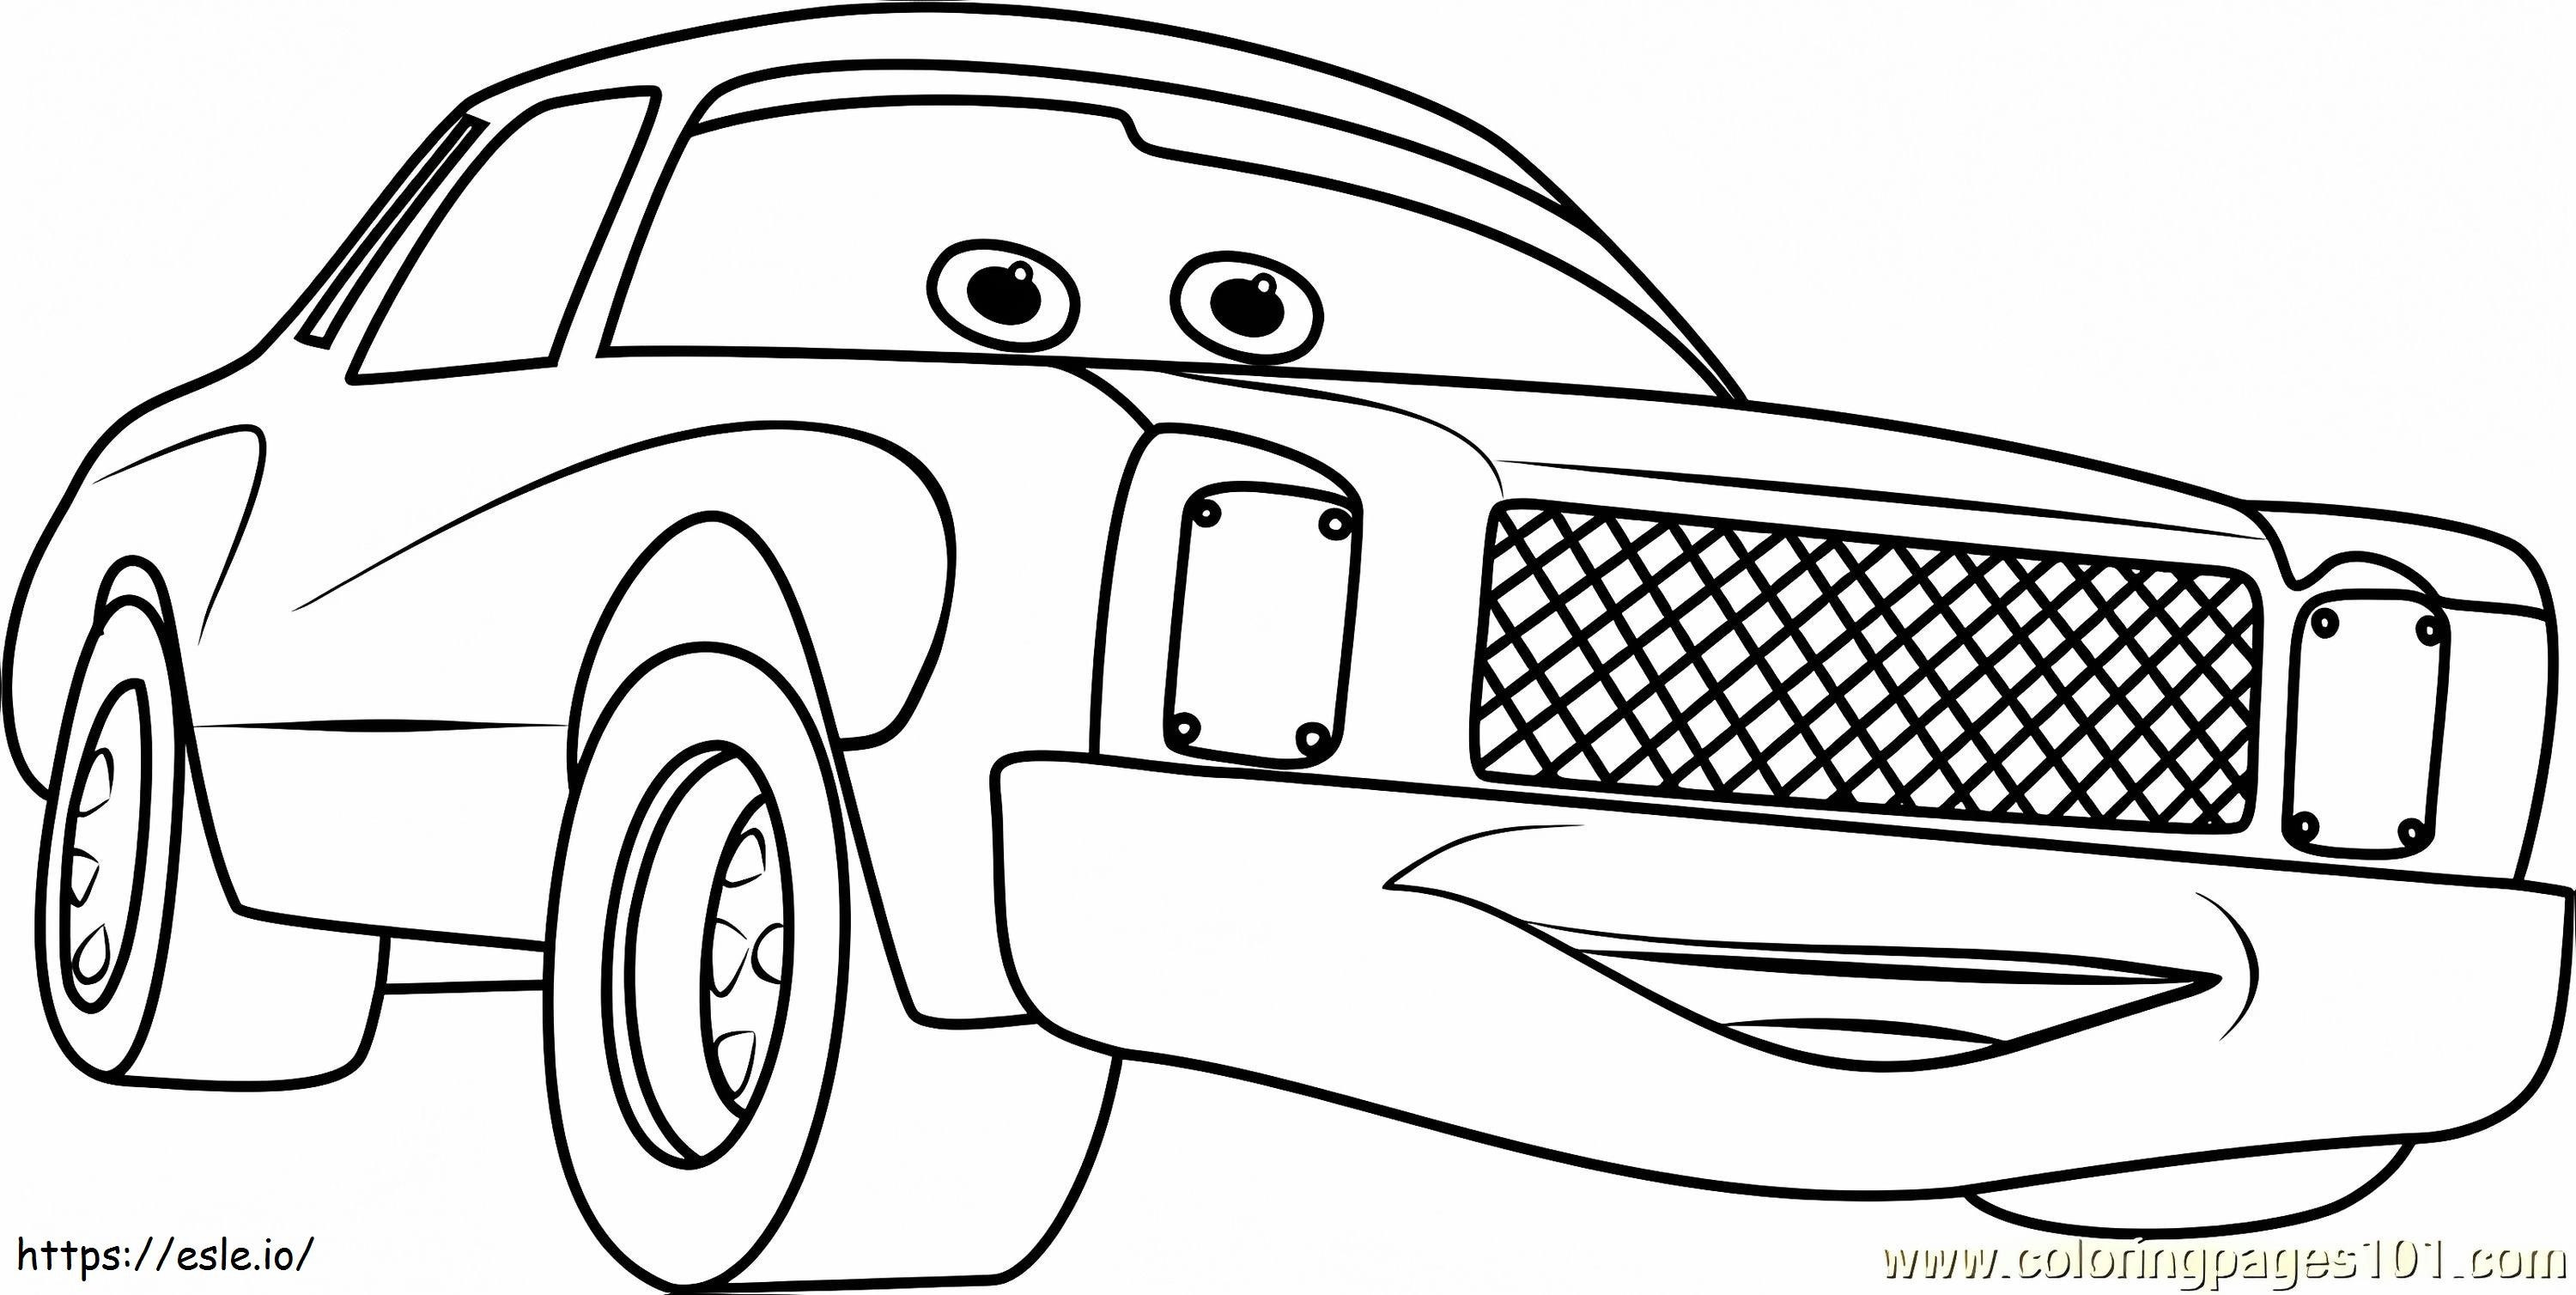 1530239156 Darrell Cartrip From Cars 31 coloring page